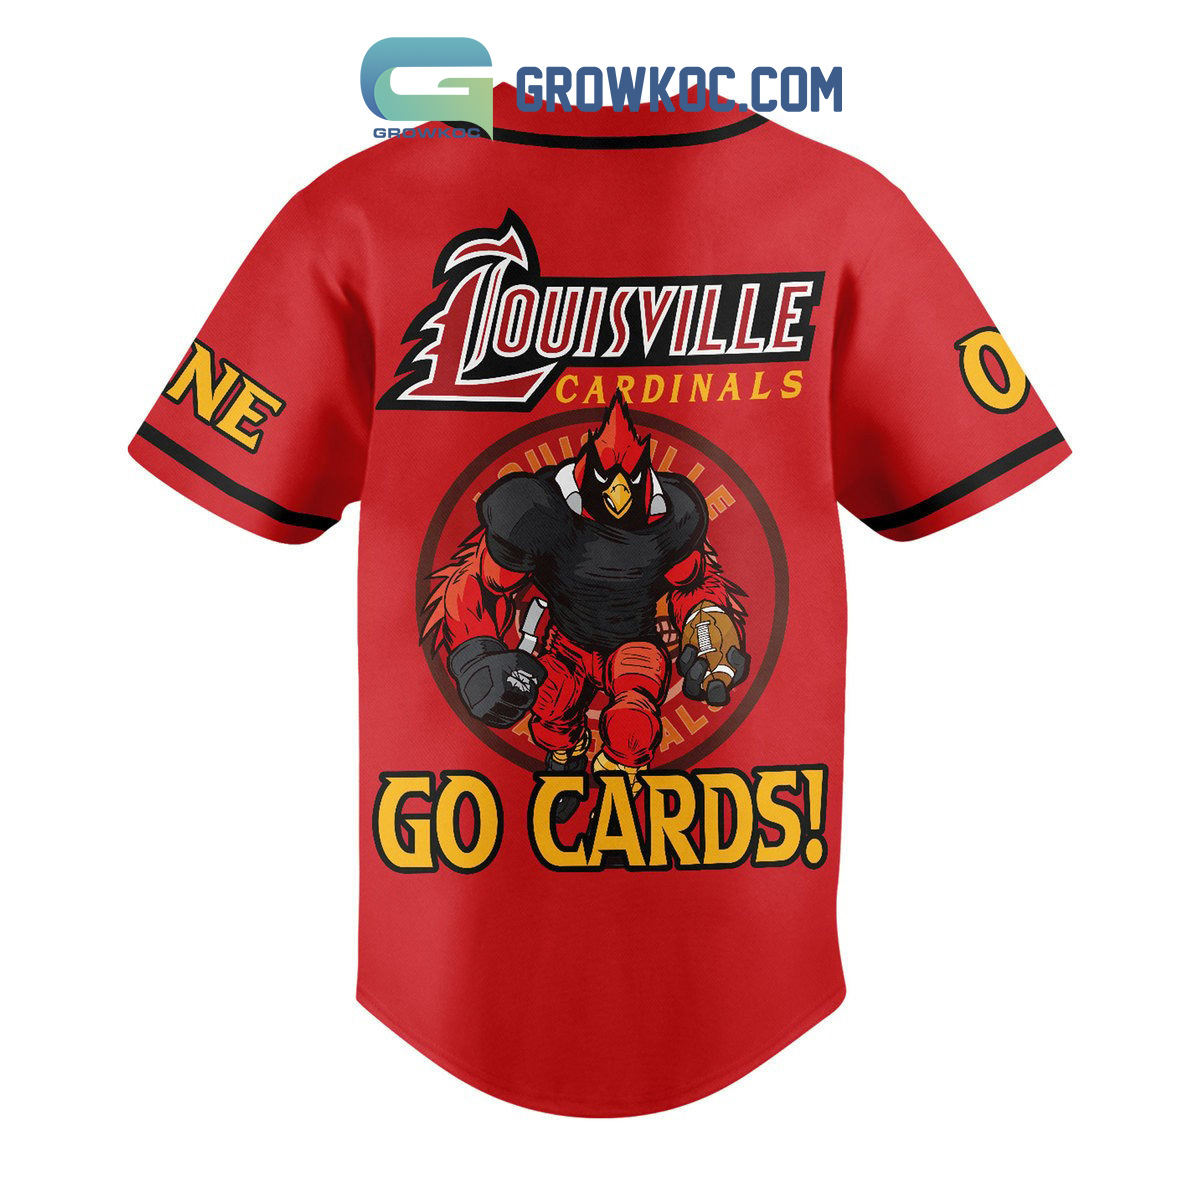 Louisville Cardinals The Ville Go Cards Personalized Baseball Jersey -  Growkoc